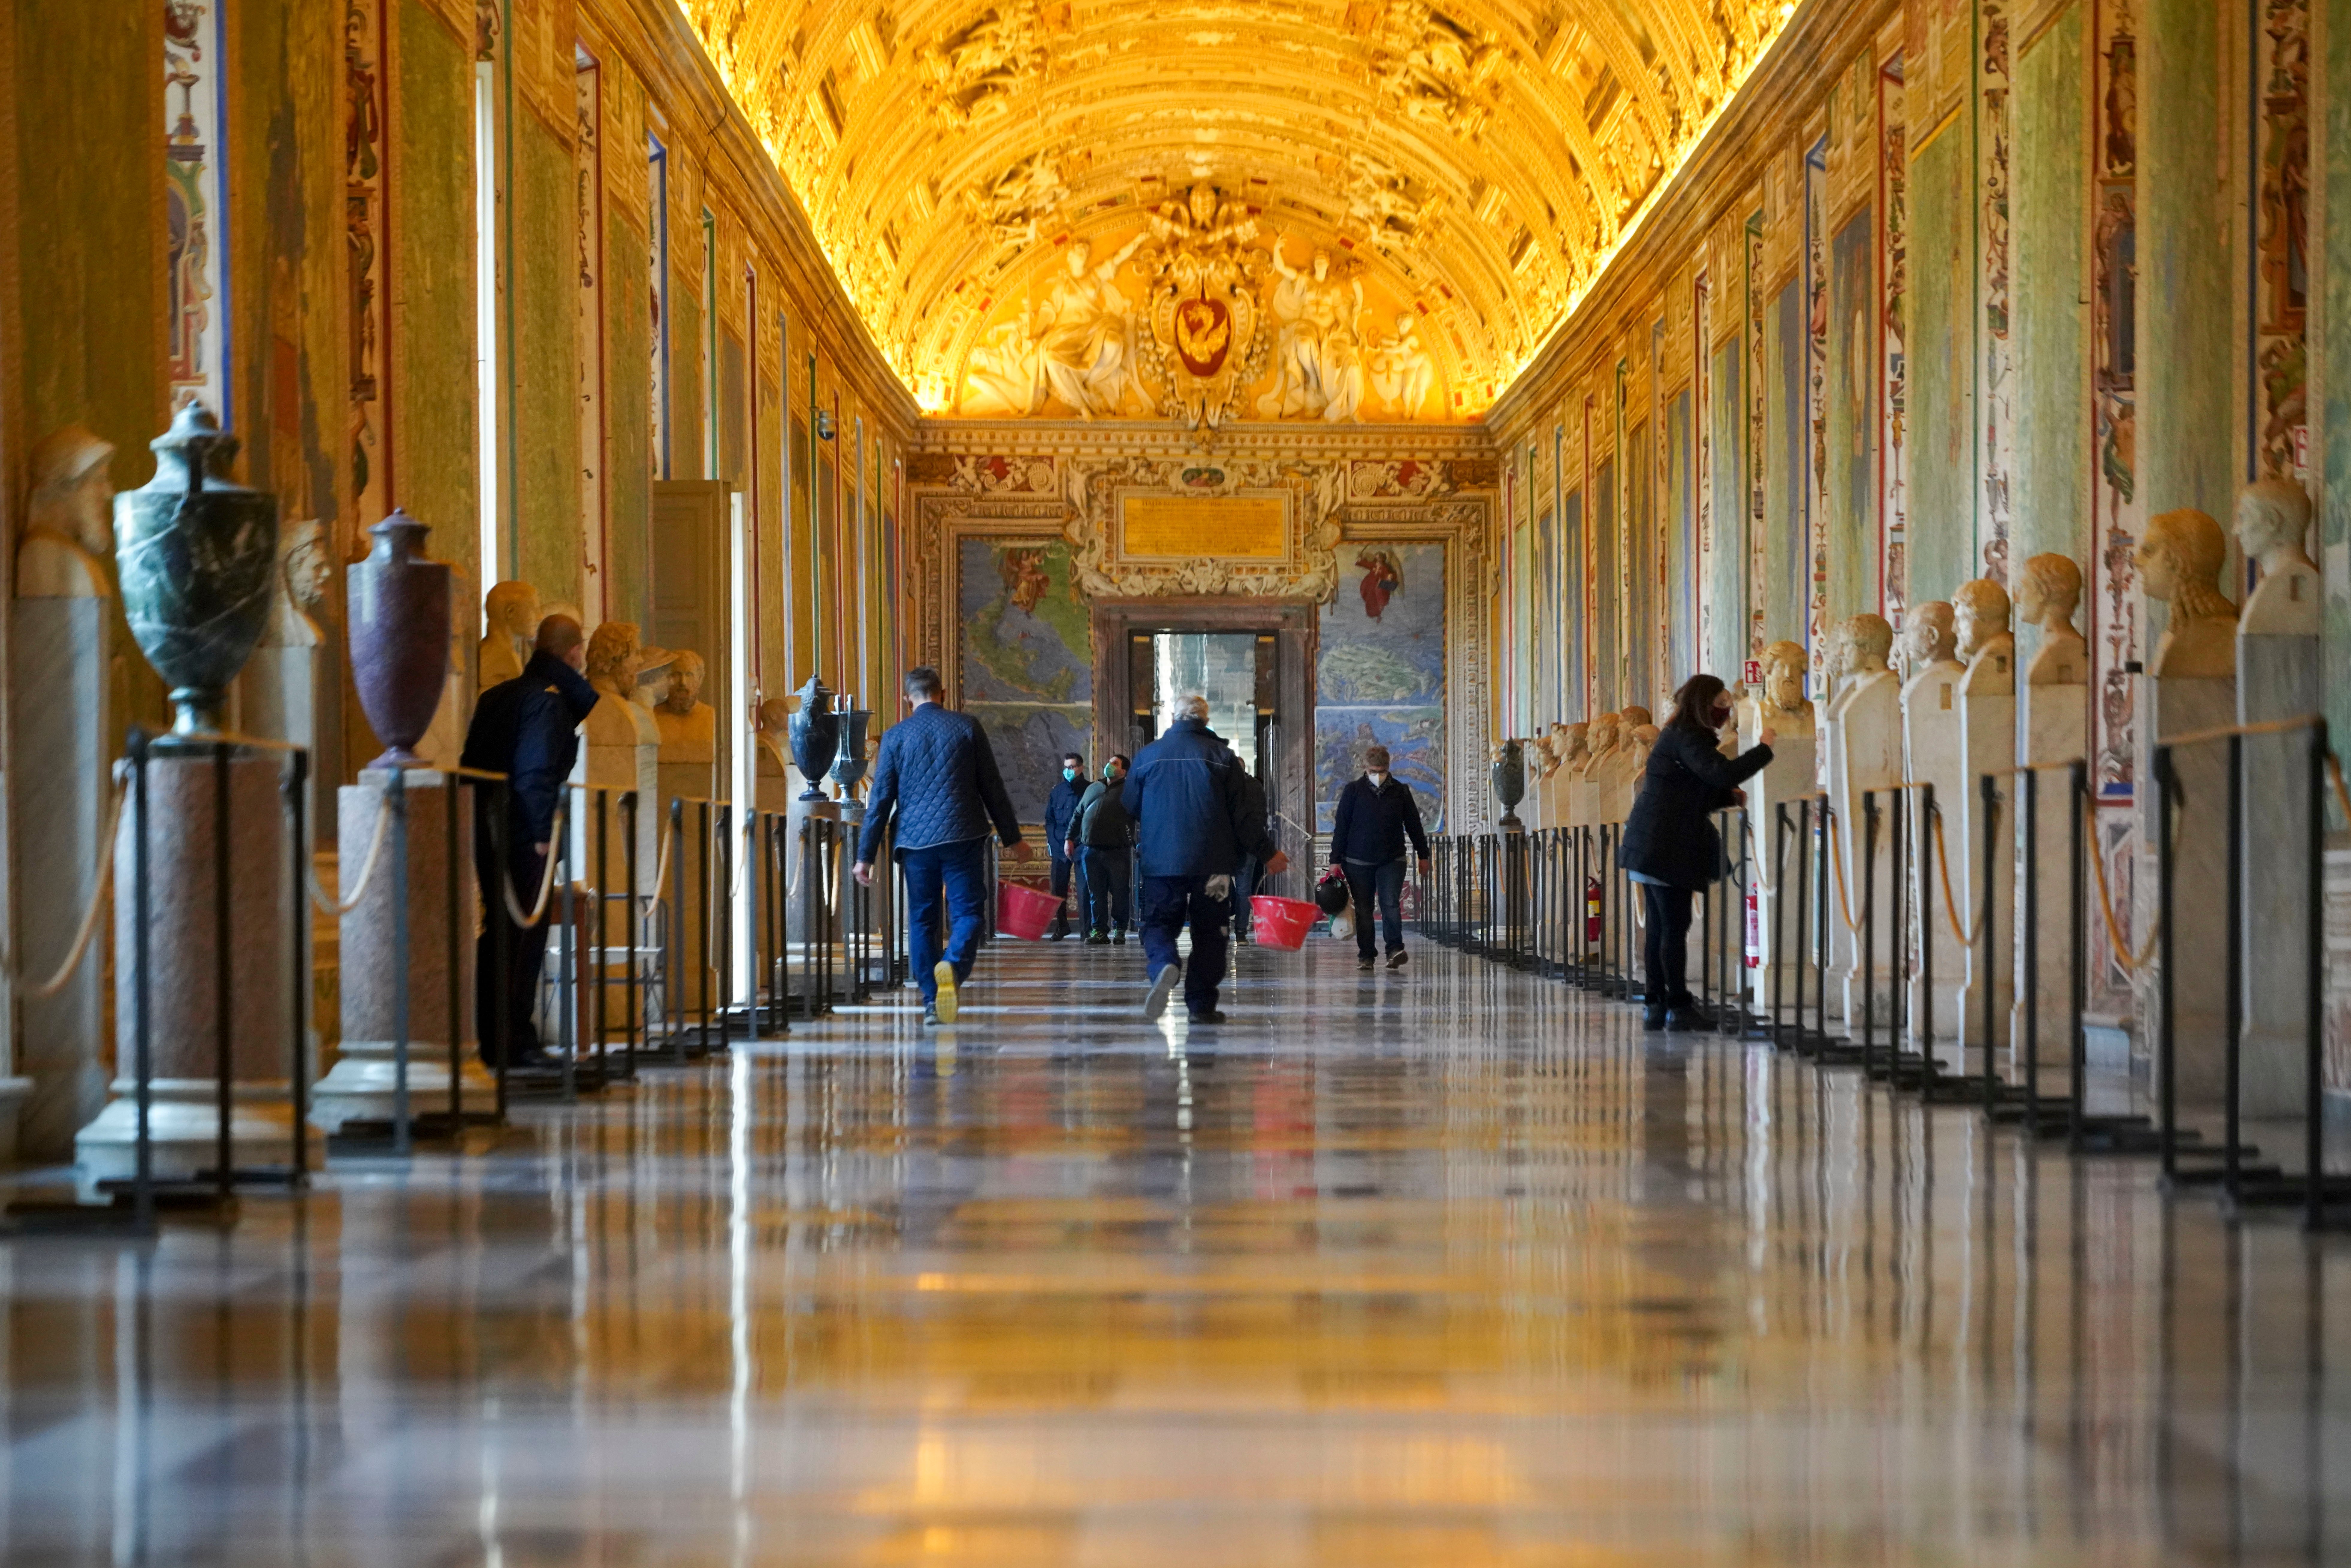 A total of 49 employees of the Vatican Museums have filed a class-action complaint with the Vatican administration